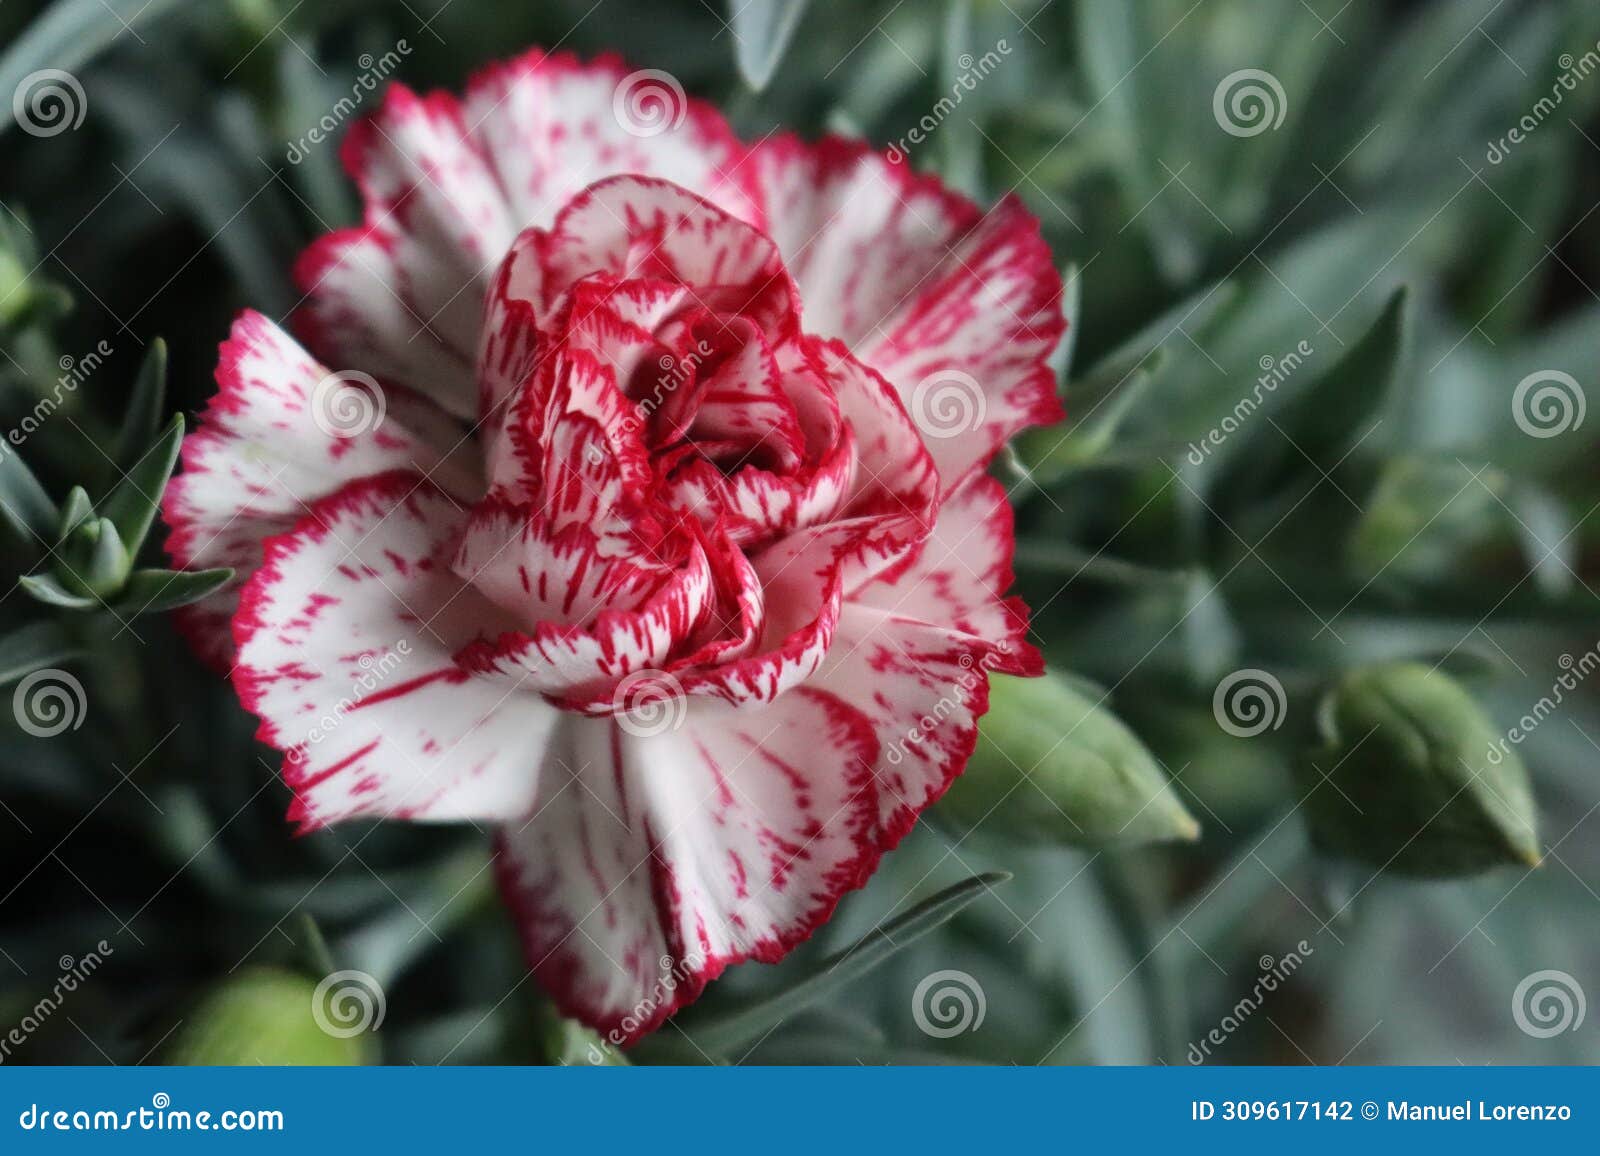 beautiful natural carnation flower color plant green red